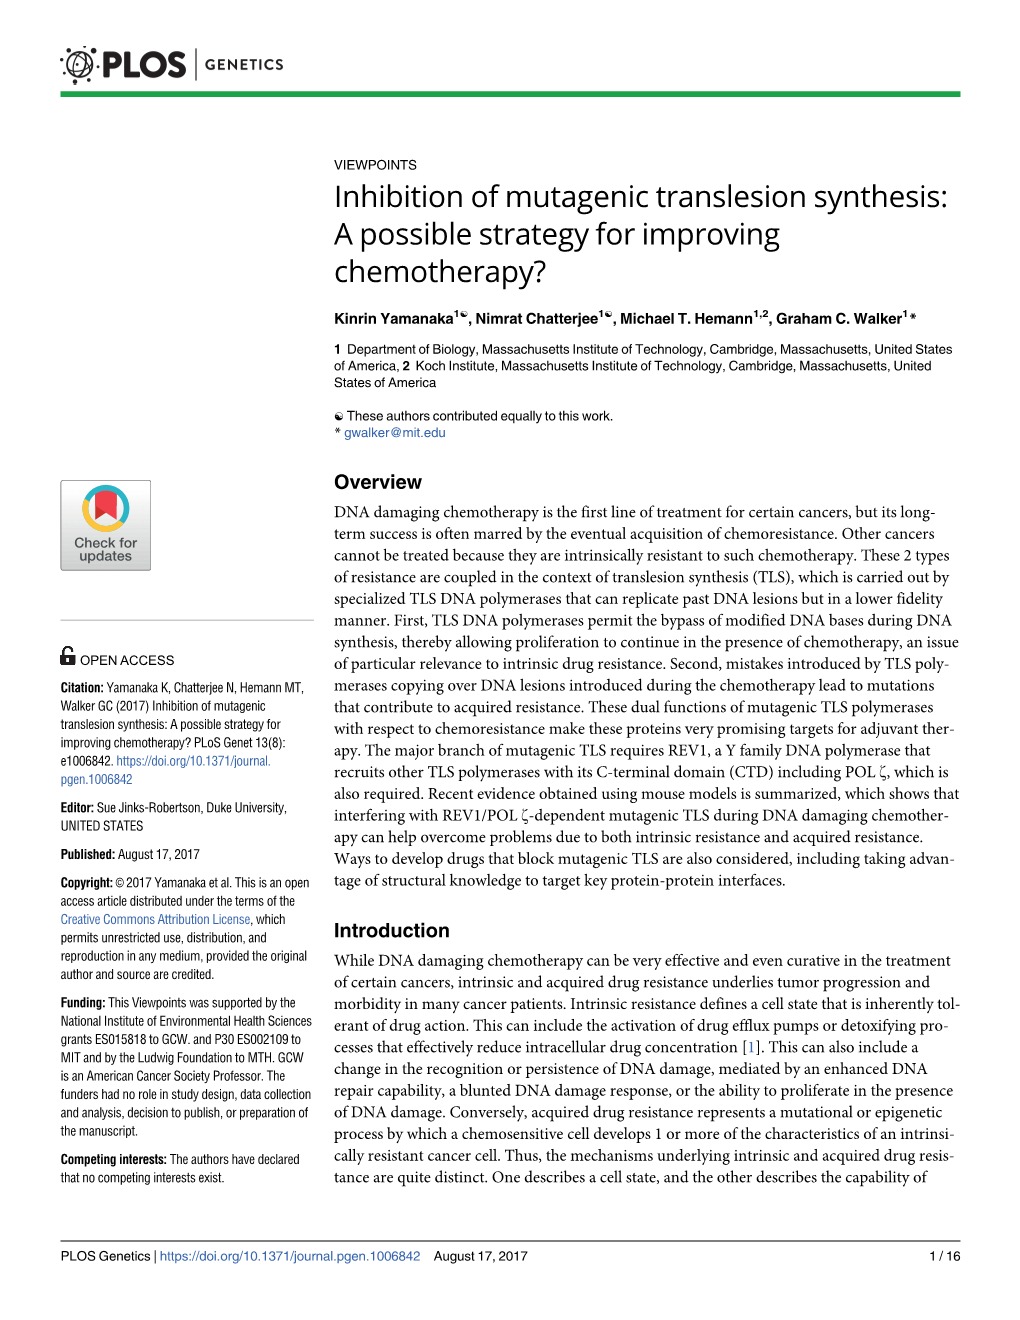 Inhibition of Mutagenic Translesion Synthesis: a Possible Strategy for Improving Chemotherapy?